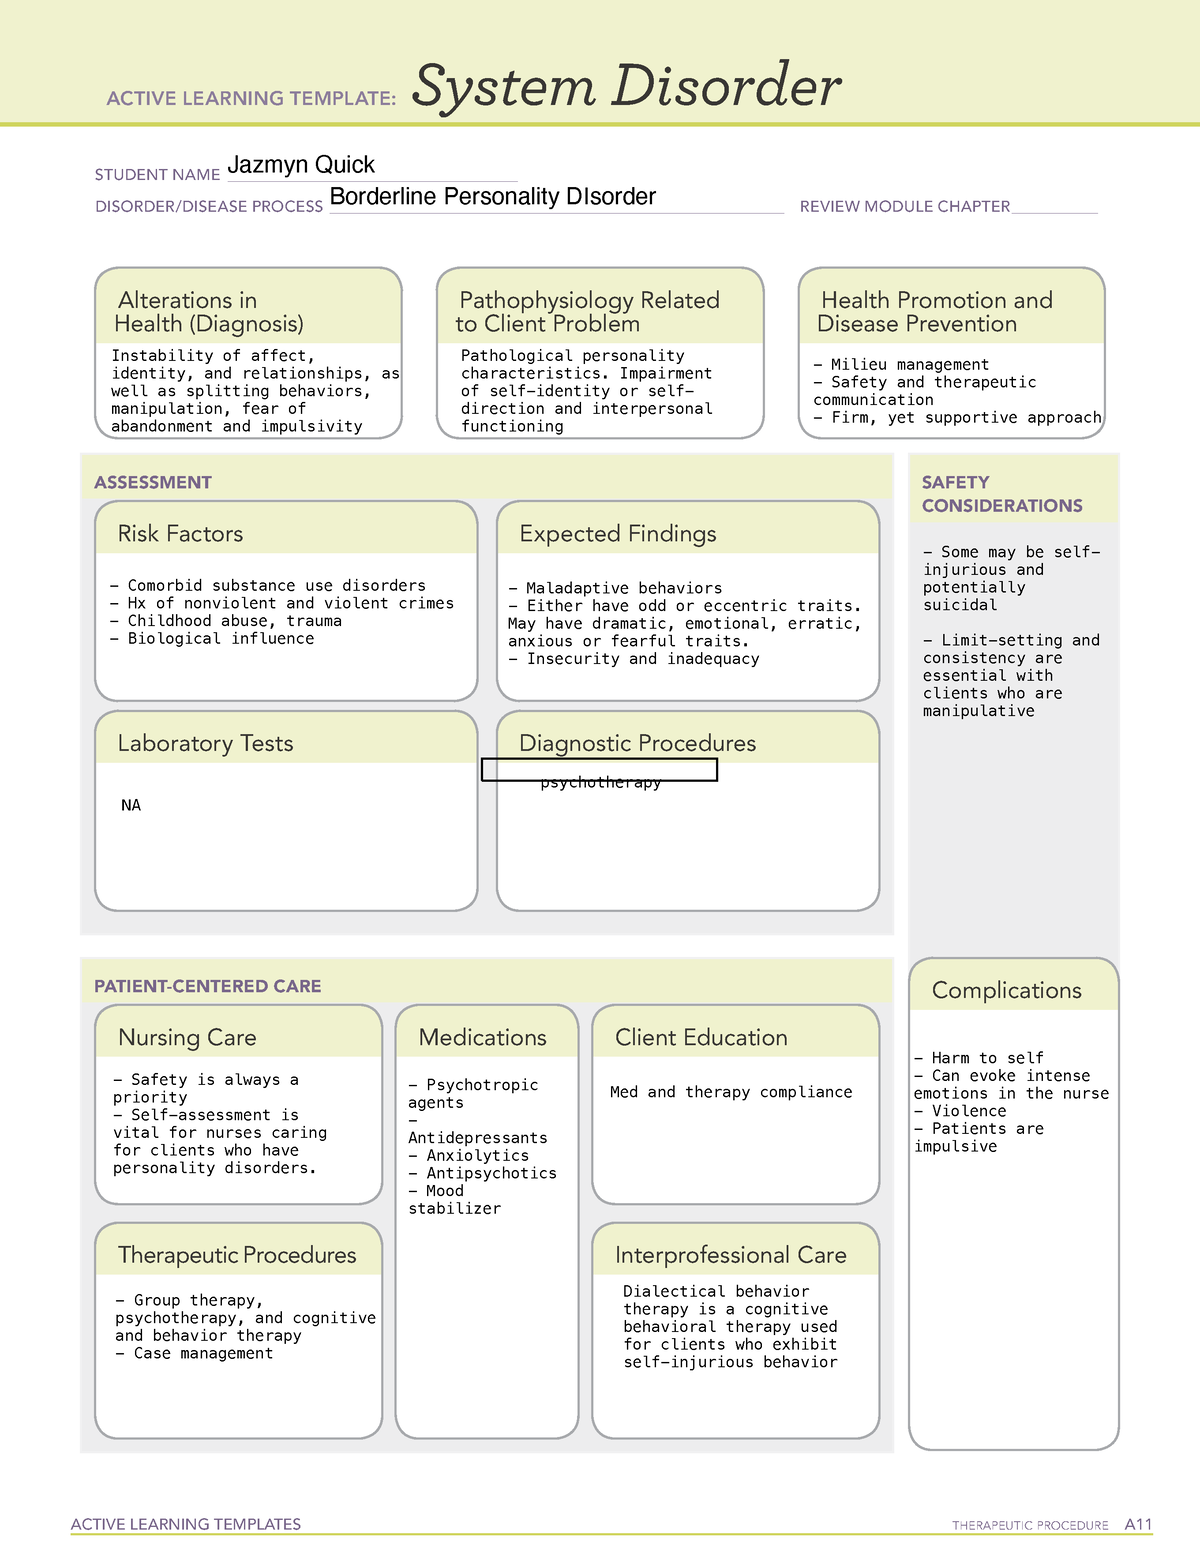 ATI BPD system disorder - ACTIVE LEARNING TEMPLATES THERAPEUTIC ...